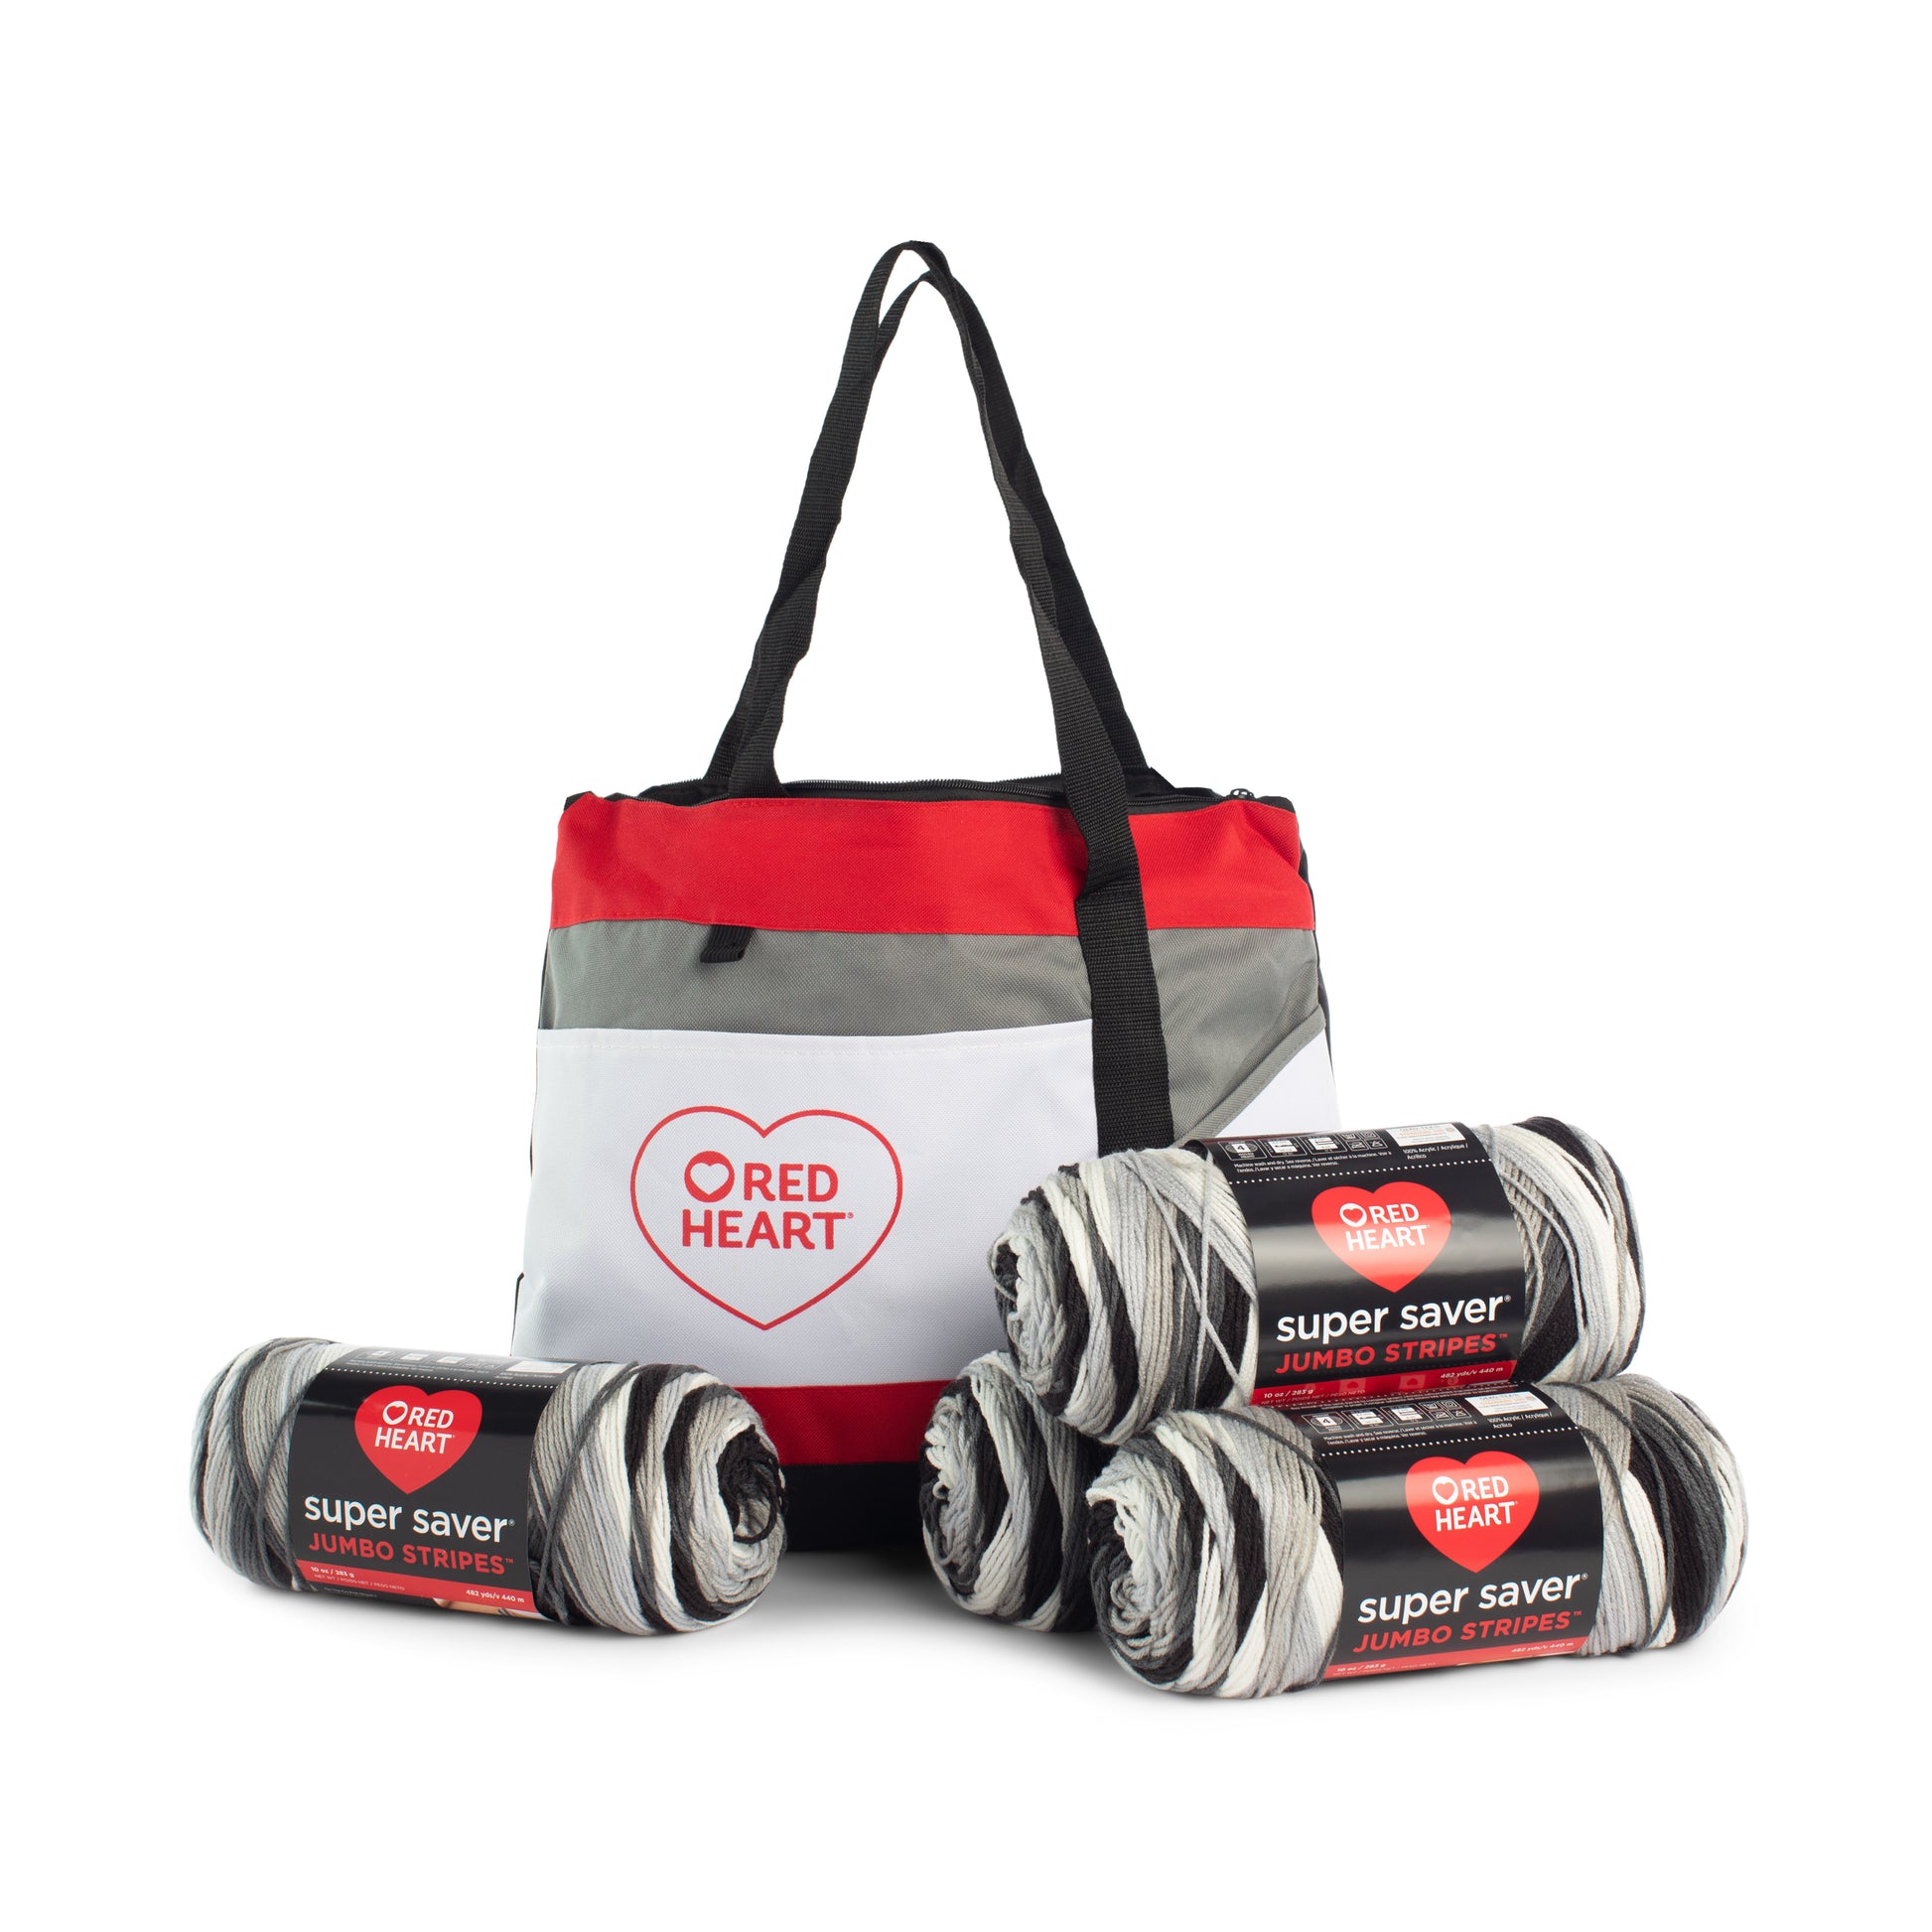 Red Heart Super Saver Jumbo Value Pack with Tote bag - Clearance item